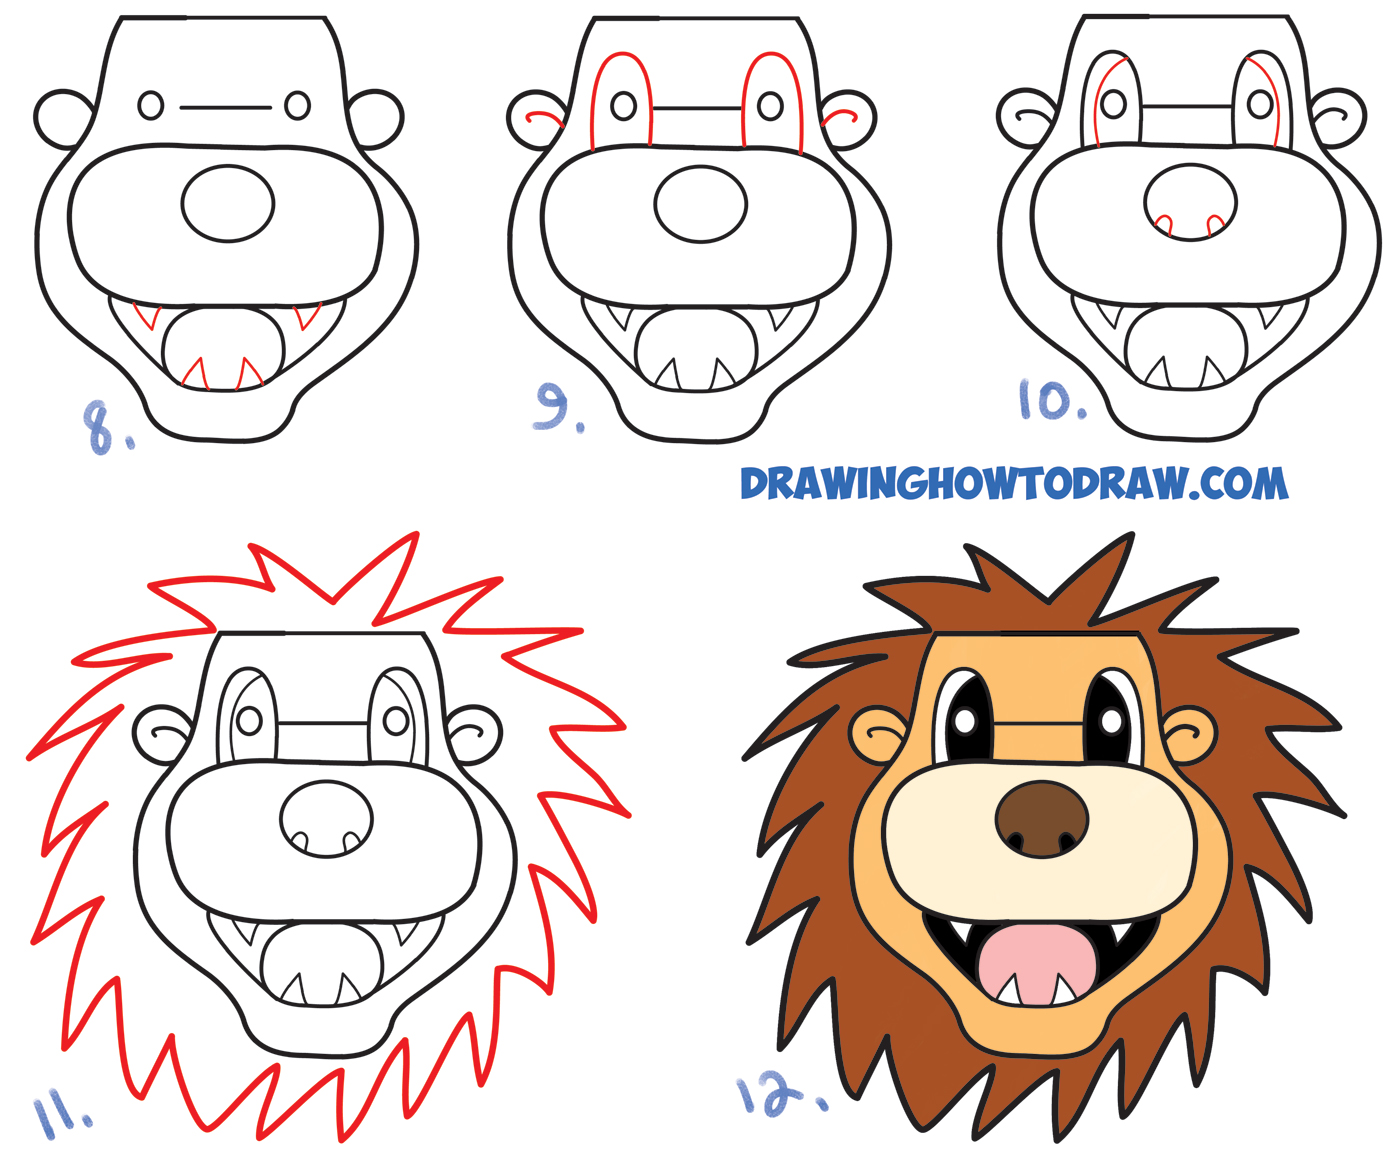 Premium Vector | How to draw cute lion cartoon for learning kid coloring  book vector illustration